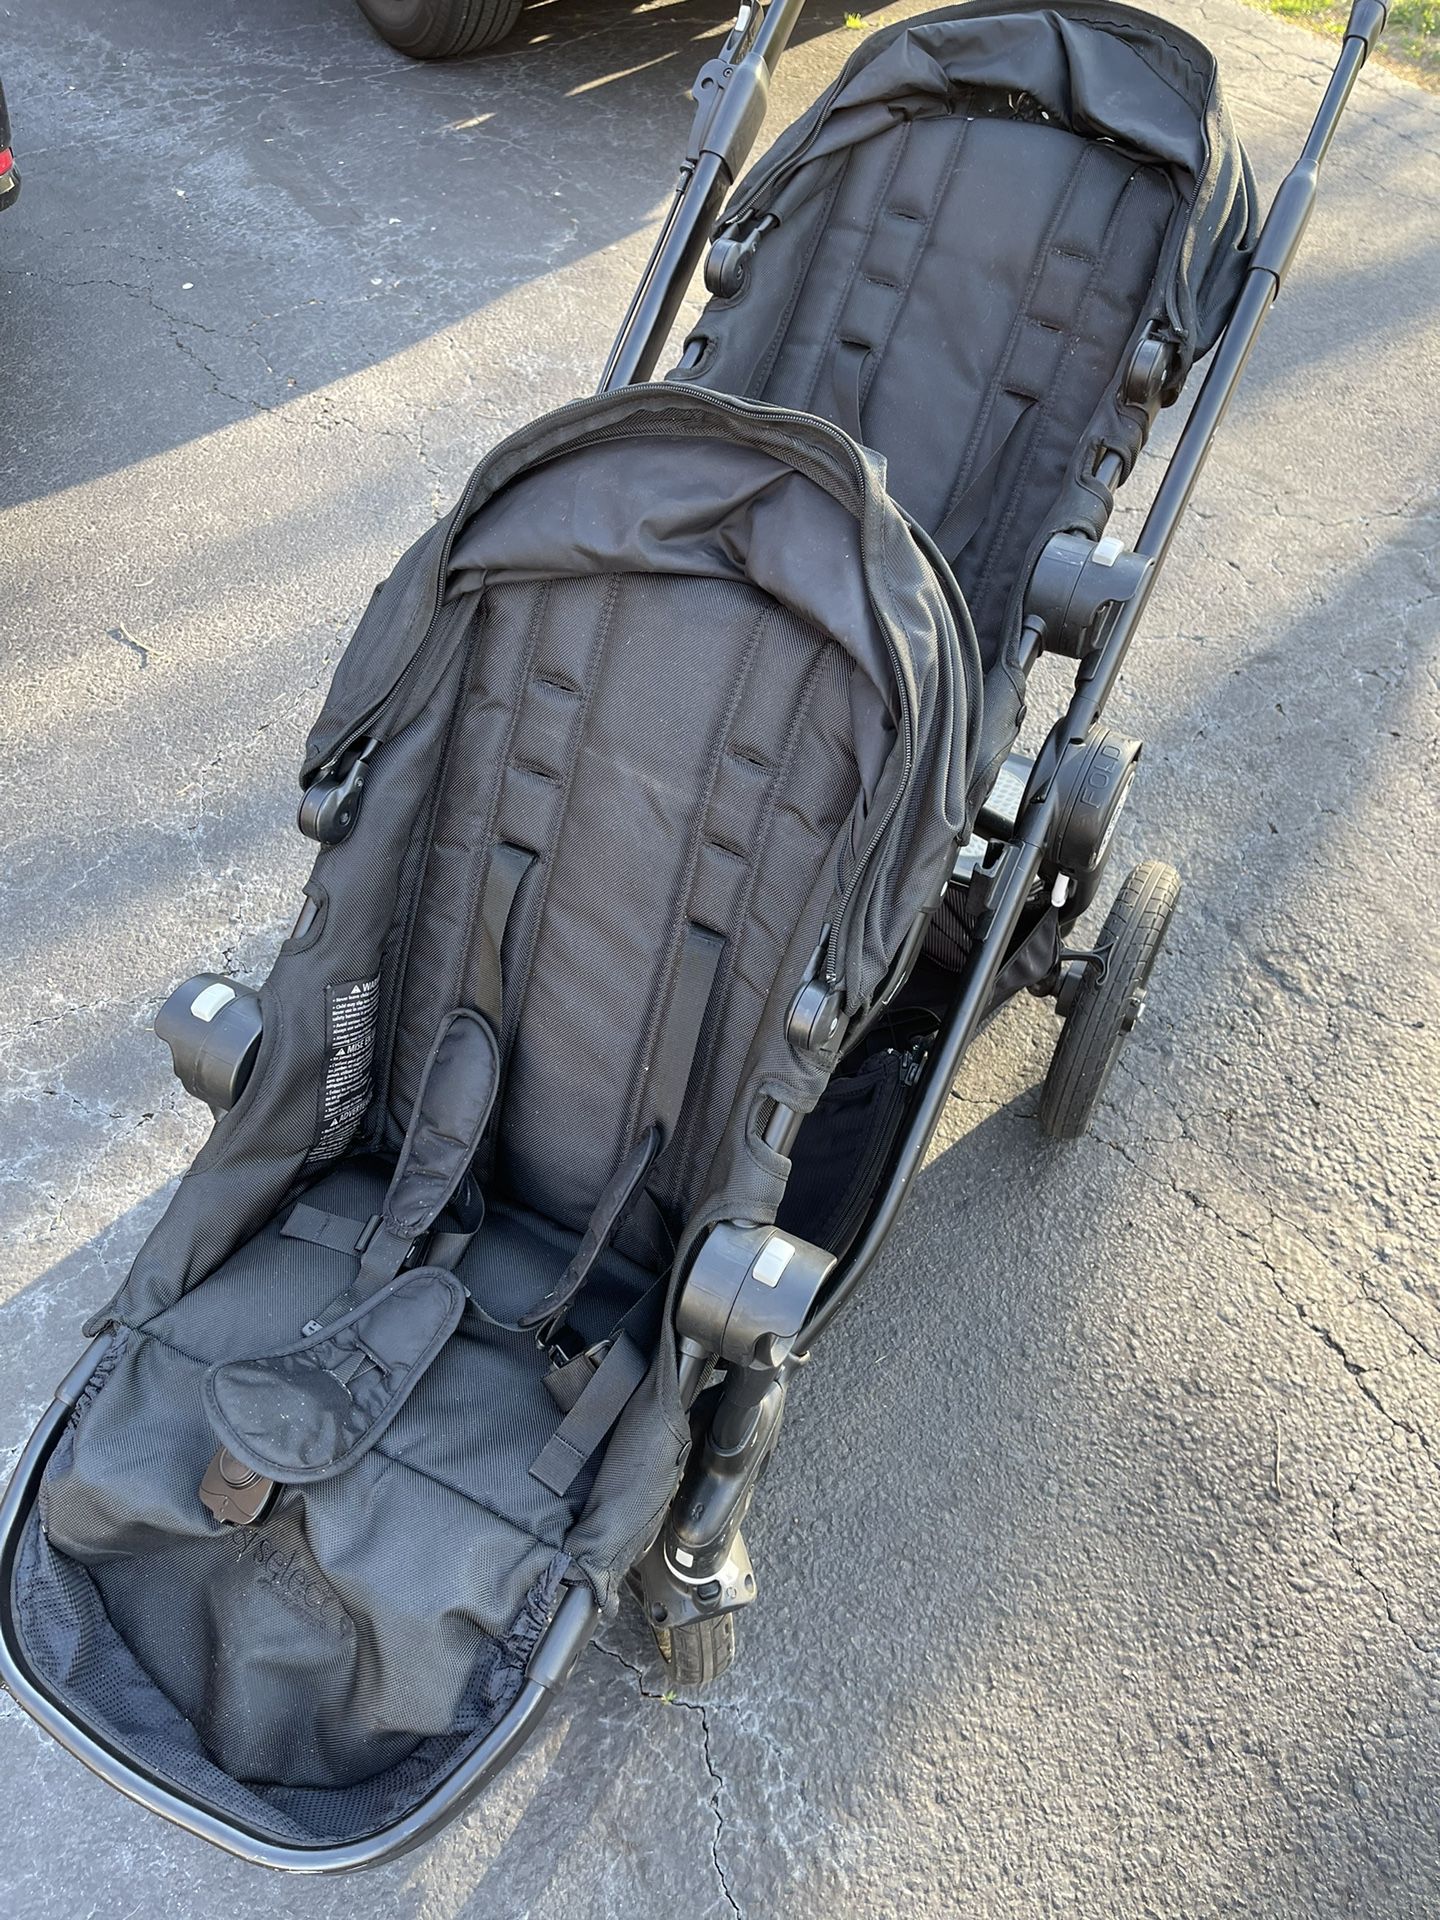 City Select Double Jogger Stroller With Adapters $130